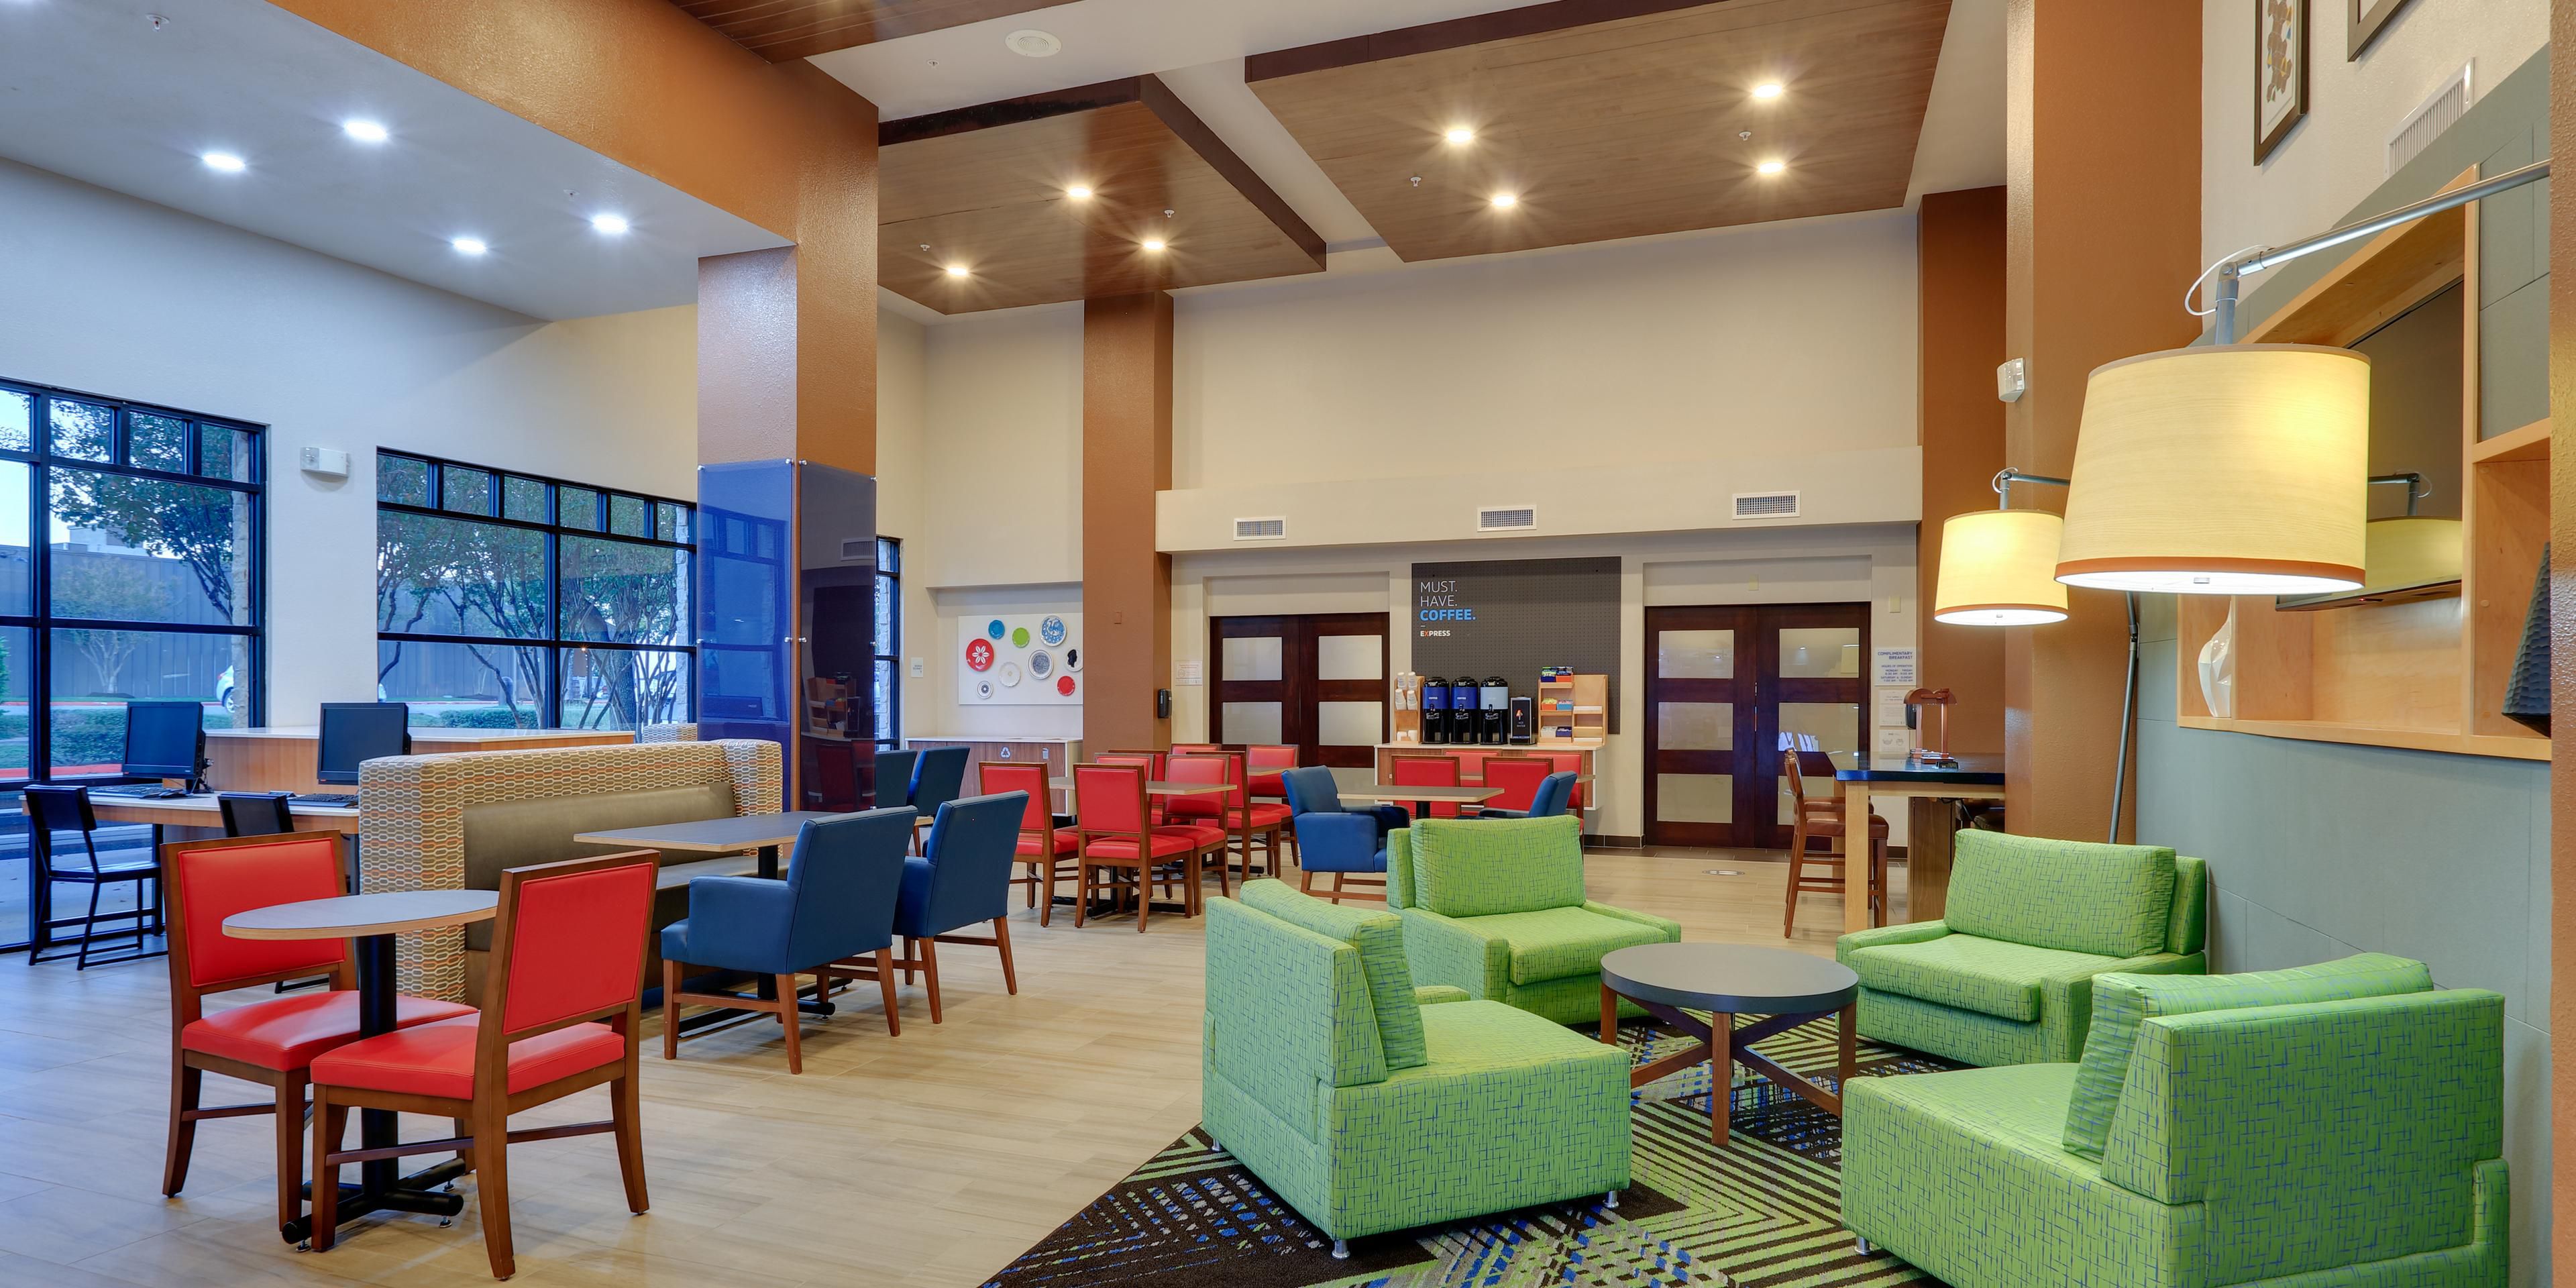 All-New Things To Love. Our hotel was fully renovated in October 2020 and is under NEW Management. Come give us a try, and experience true hospitality during your visit to Round Rock, Texas!